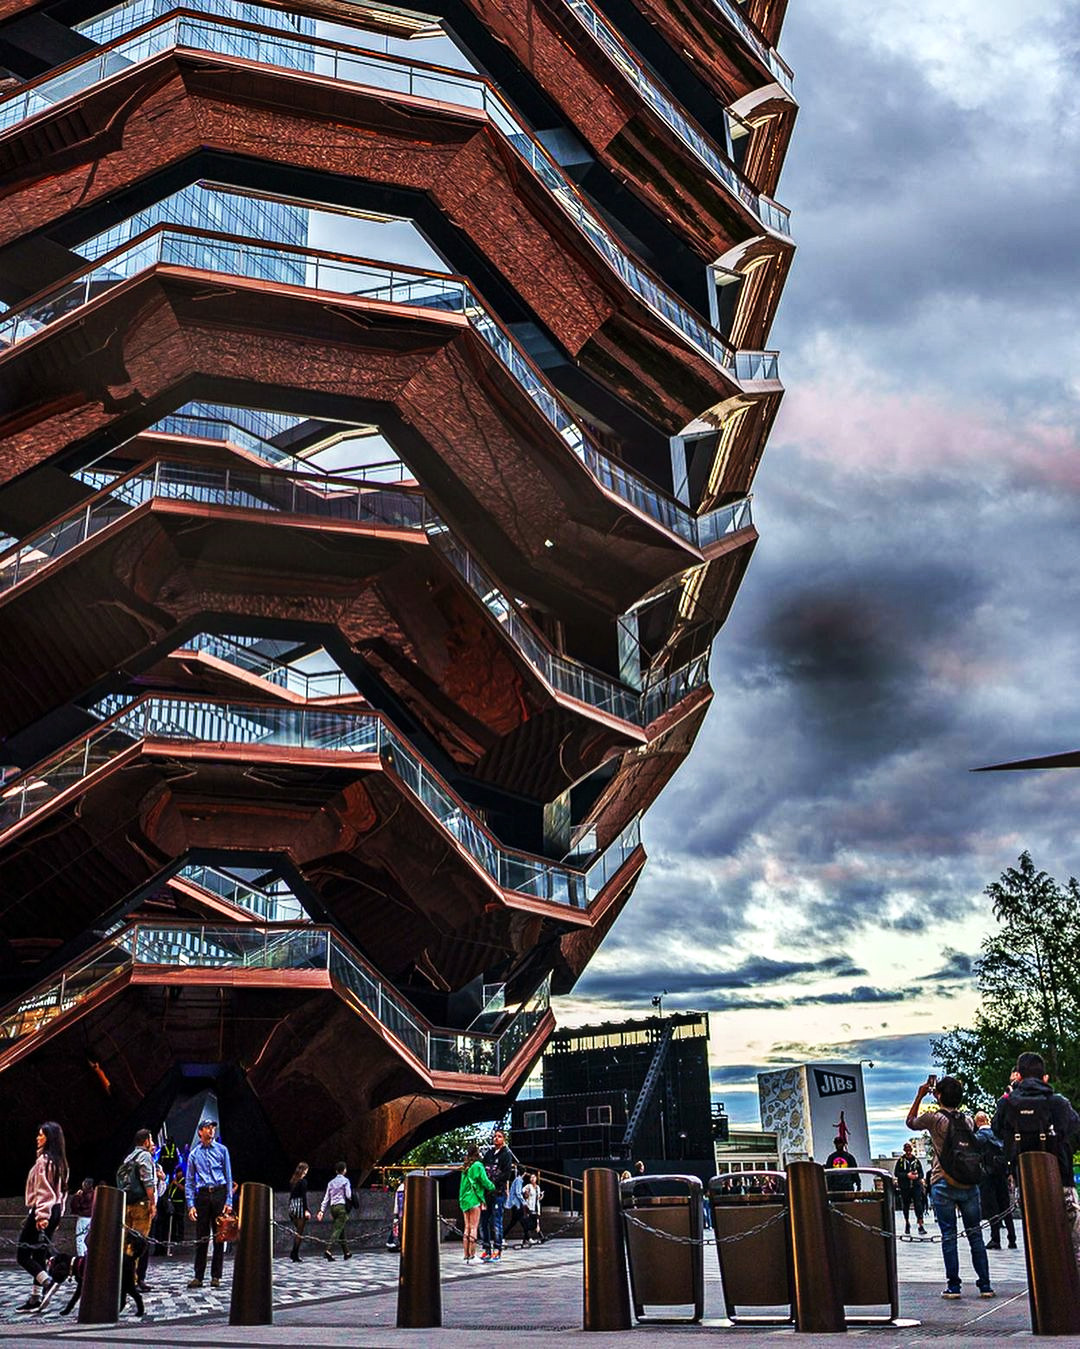 [[MORE]]Vessel is a structure and visitor attraction built as part of the Hudson Yards Redevelopment Project in Manhattan, New York City, New York.
20 Hudson Yards, New York, NY 10001